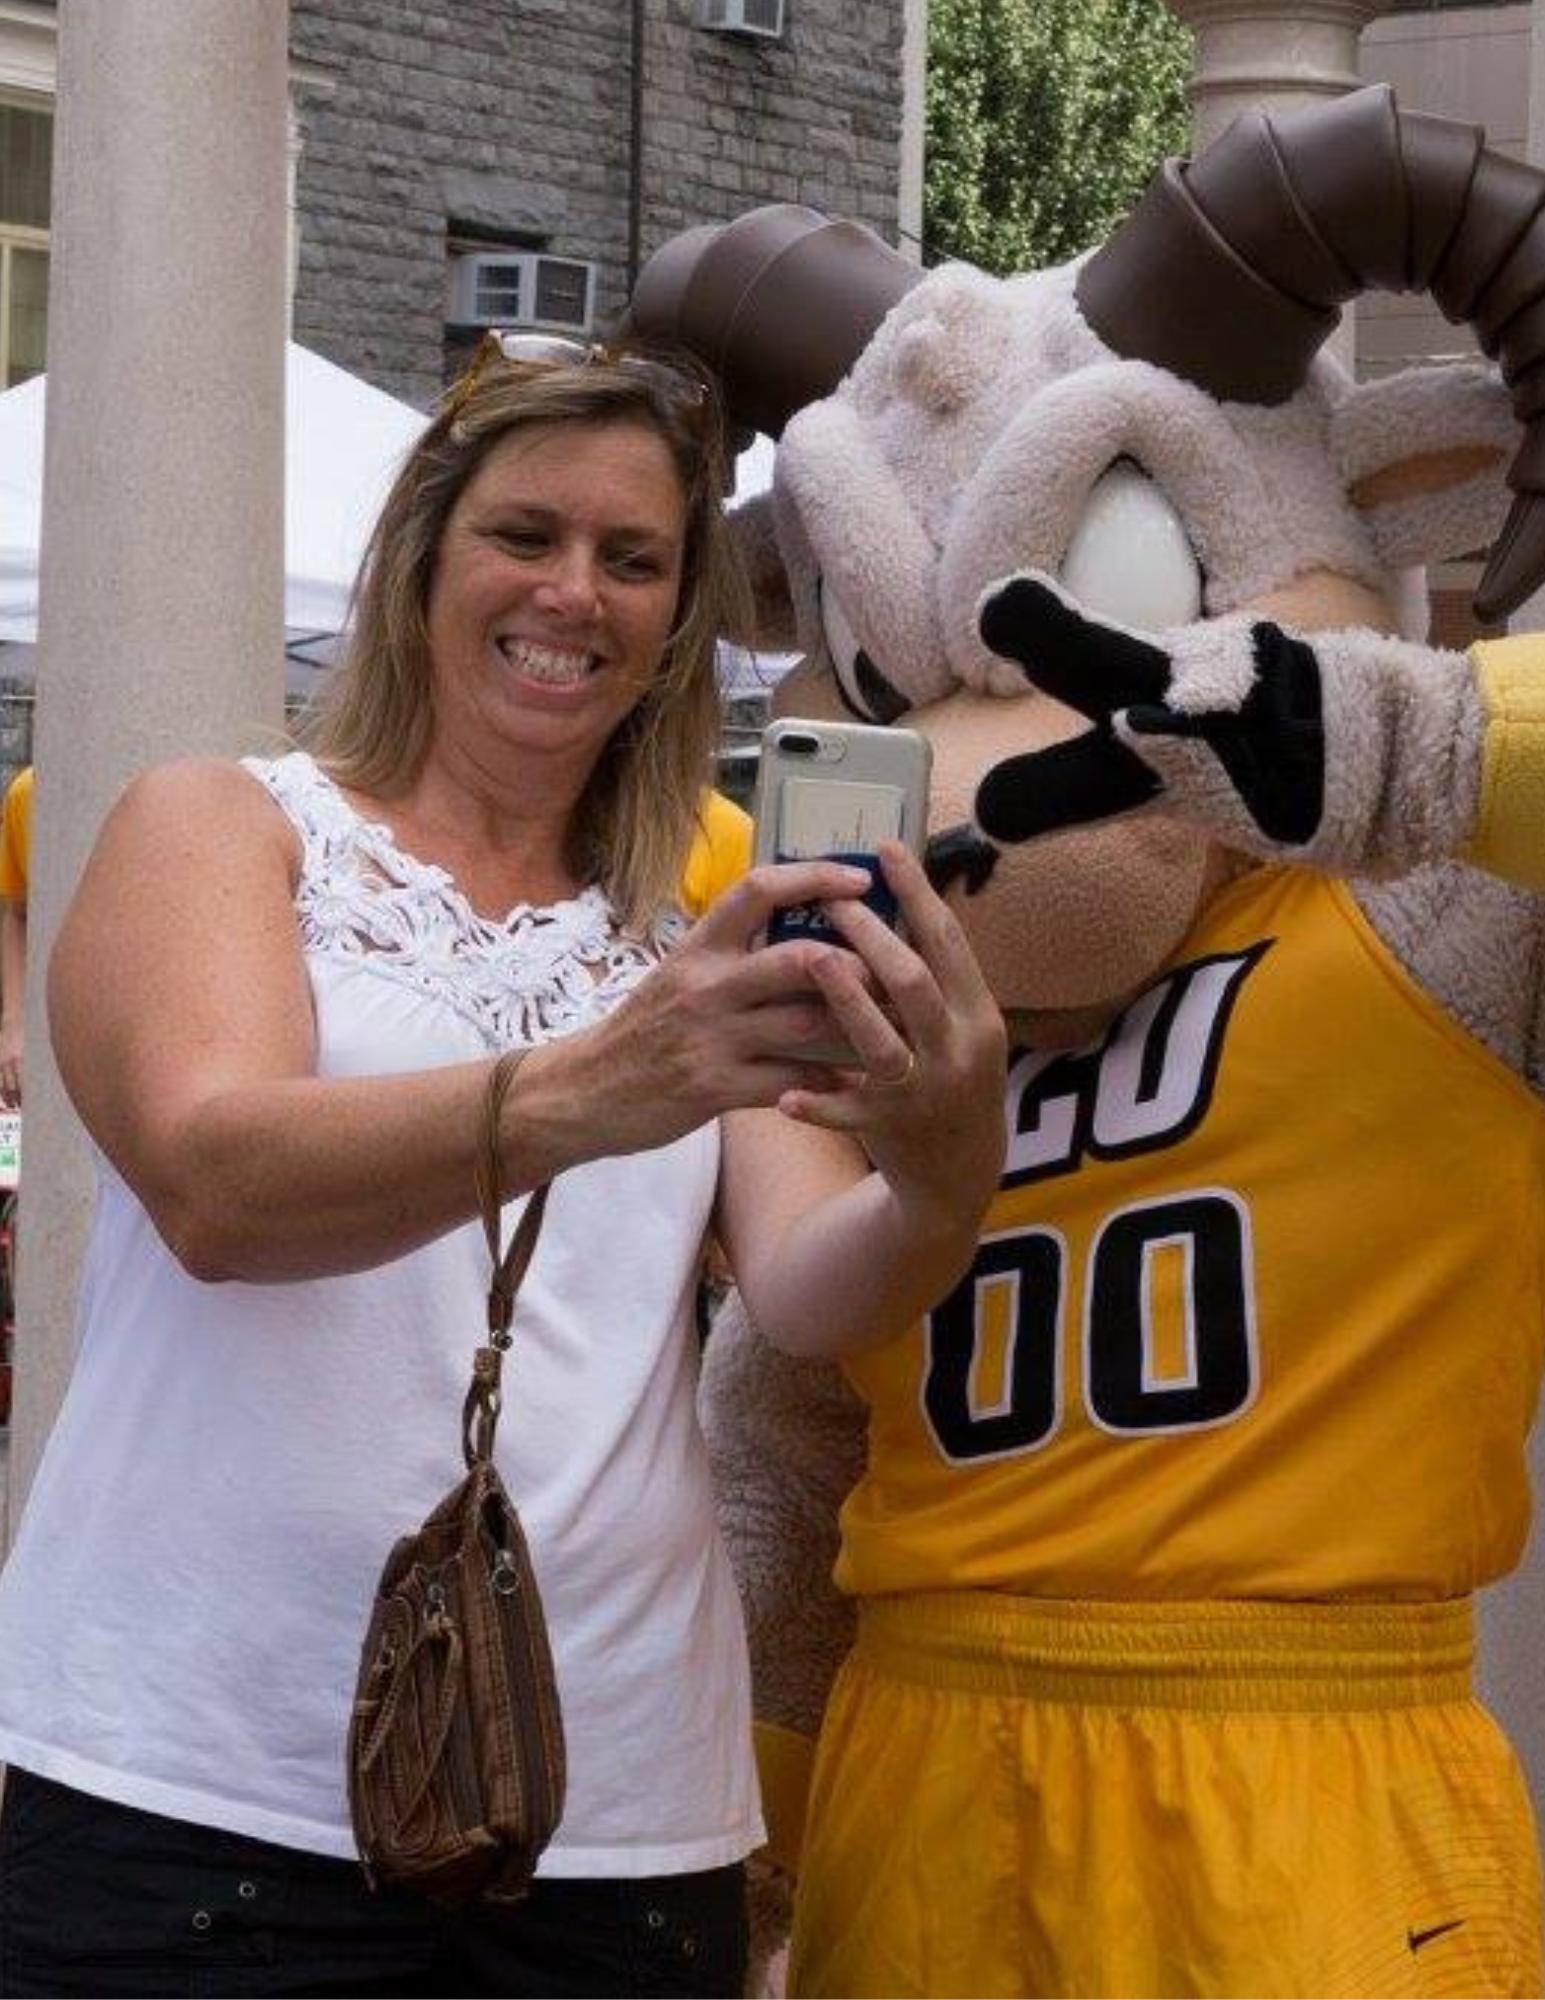 VCU mother taking selfie with Rodney